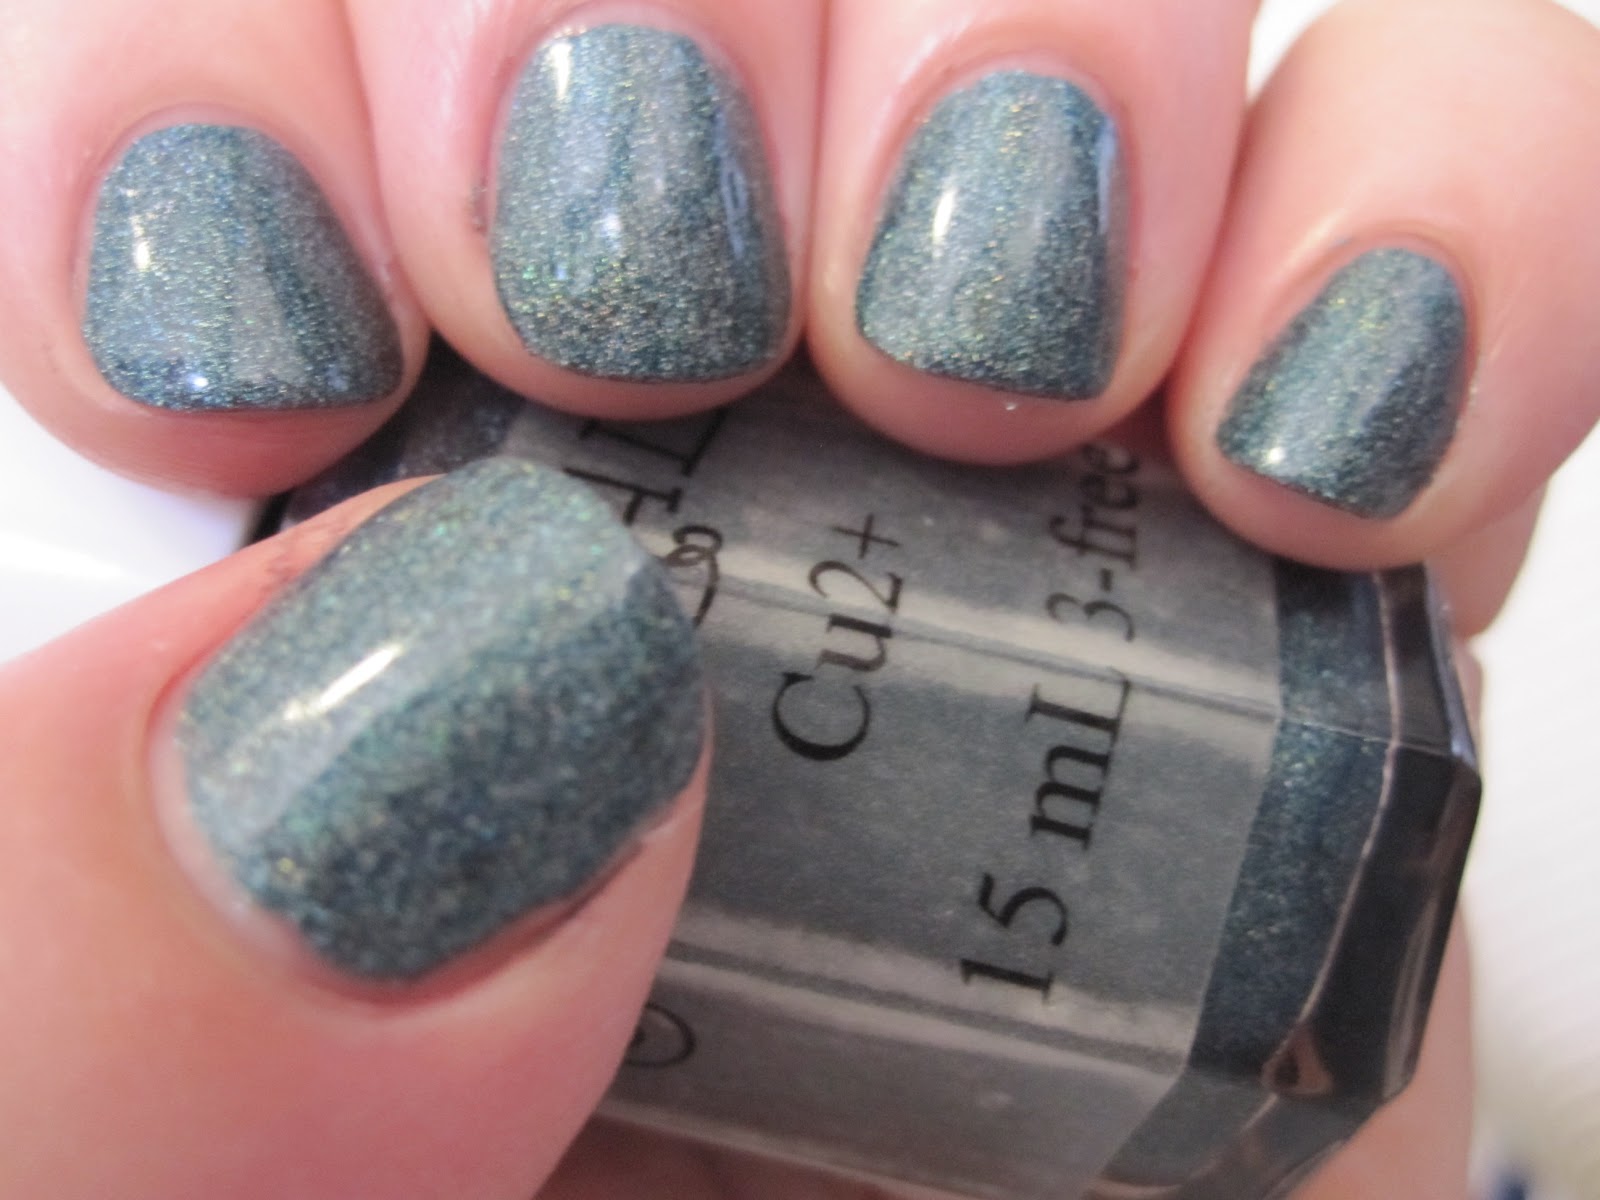 2. "Tranquil Teal" Nail Polish - wide 6